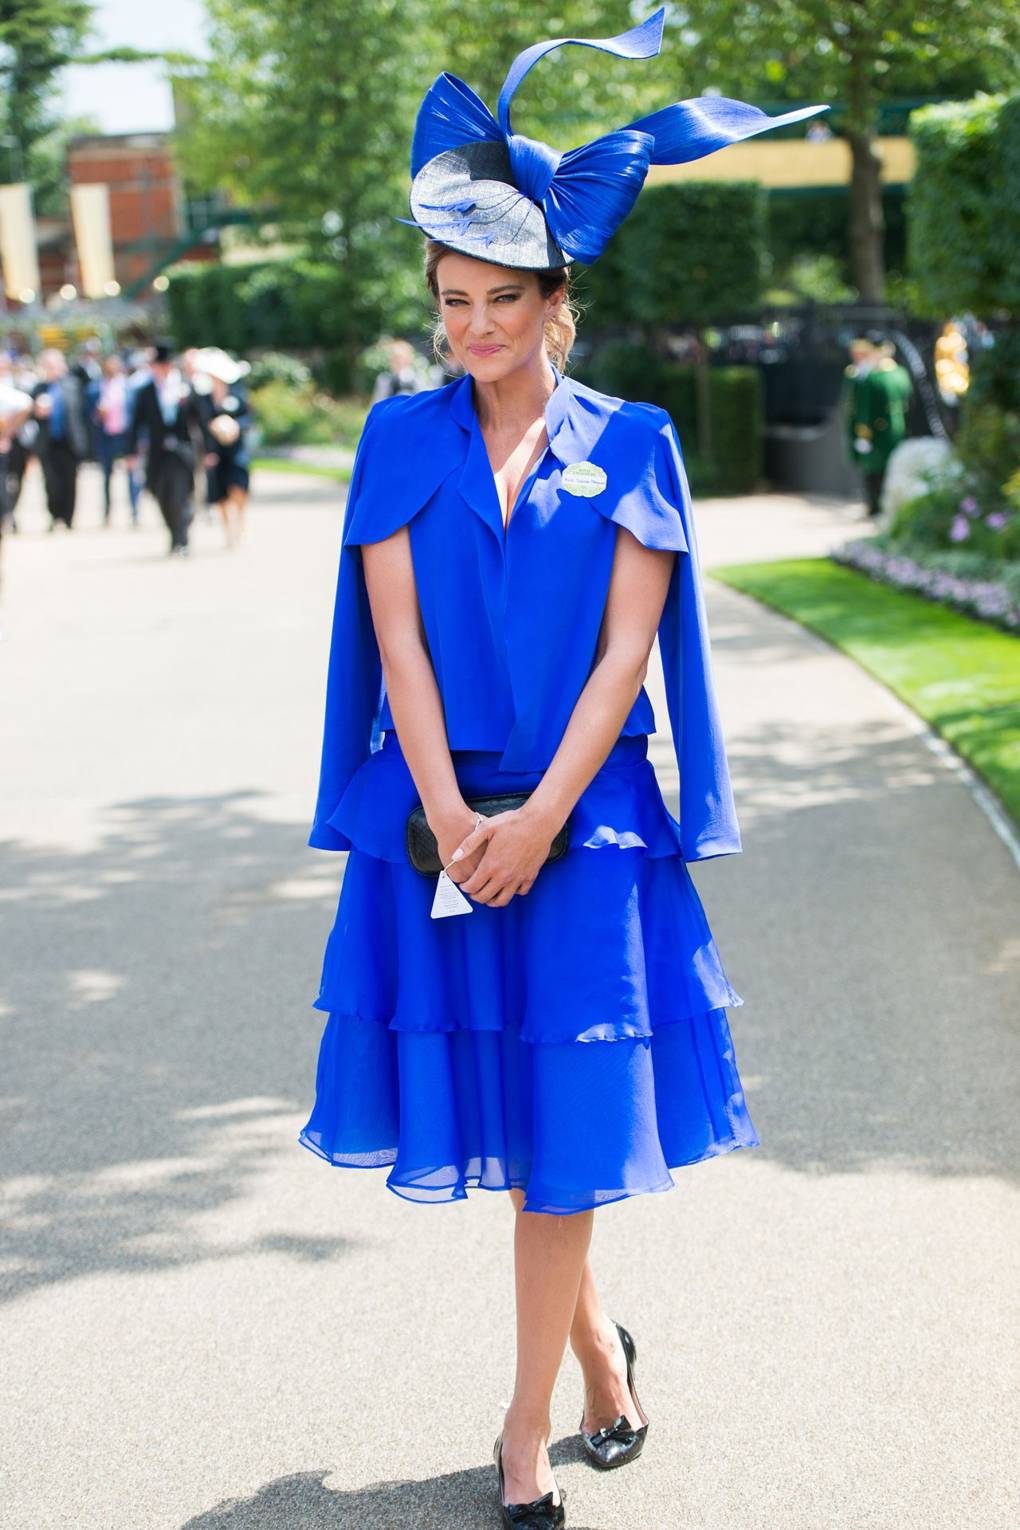 Royal Ascot street style, best dresses at Ascot that are bright and